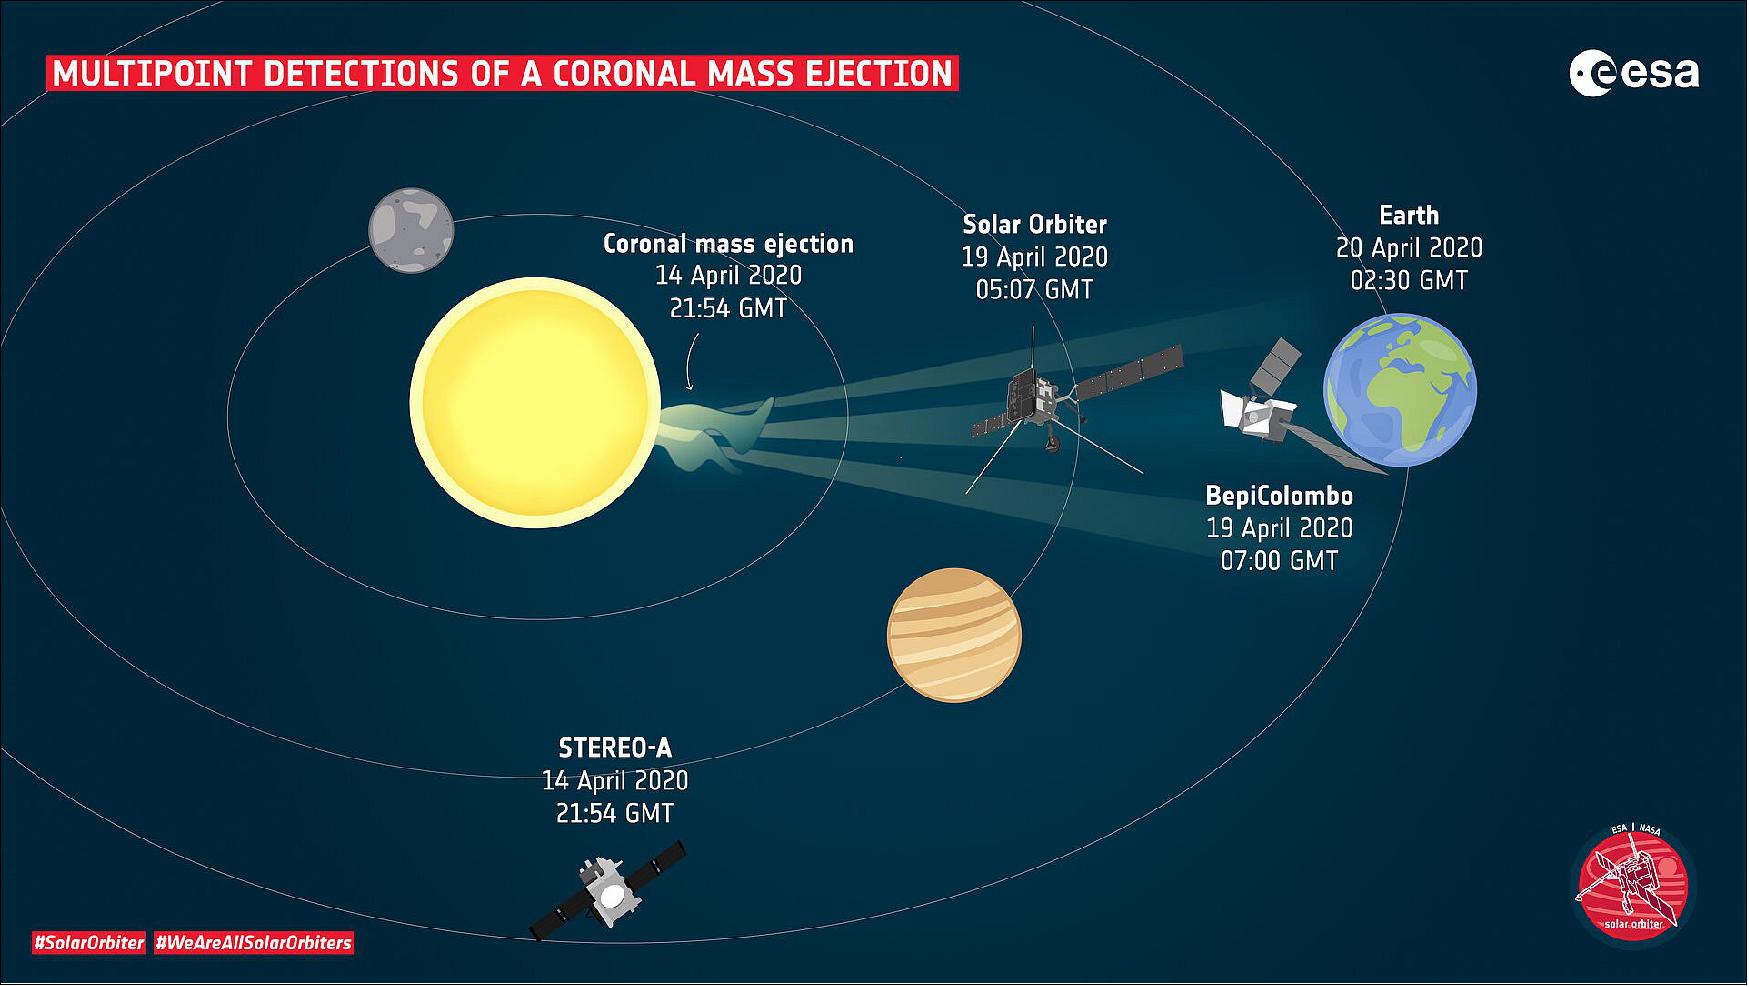 Figure 65: Multipoint detections of a coronal mass ejection. A few months after Solar Orbiter was launched in February, it measured the effects of a CME (Coronal Mass Ejection) that came from the Sun. Similar measurements from other ESA and NASA spacecraft have allowed the evolution of the CME to be charted during its five-day passage from the Sun to the Earth. - A CME is an eruption of around a billion tons of particles that comes from the solar atmosphere, the corona, and travels through the solar system. CMEs are an important part of ‘space weather'. The particles spark aurorae on planets with atmospheres, and can cause malfunctions in some technology. They can also be harmful to unprotected astronauts. So it is important to understand CMEs, and be able to track their progress. - The CME that Solar Orbiter detected on 19 April was not particularly large or powerful. ESA's Solar and Heliospheric Observatory (SOHO), which watches for CMEs heading for the Earth barely registered the eruption. Nevertheless, the CME effects were measured by Solar Orbiter and later by BepiColombo. - It was also seen by NASA's STEREO-A spacecraft, which is situated about ninety degrees away from the direct Sun-Earth line, and looking directly across the area of space that the CME travelled through. - The CME erupted on 14 April at 21:54 GMT. It passed Solar Orbiter, which was upstream of the Earth and nearer to the orbit of Venus at the time, at 05:07 GMT on 19 April. BepiColombo, which was closer to Earth, detected the CME at 07:00 GMT on the same day, and it finally passed by the Earth at 02:30 GMT on 20 April. - With this multitude of datasets, researchers can trace the movement and evolution of the CME through time and space. It represents an example of ‘multipoint solar science', which is set to become a feature of the Solar Orbiter mission as scientists correlate its measures with data from other spacecraft in the inner Solar System (image credit: ESA)